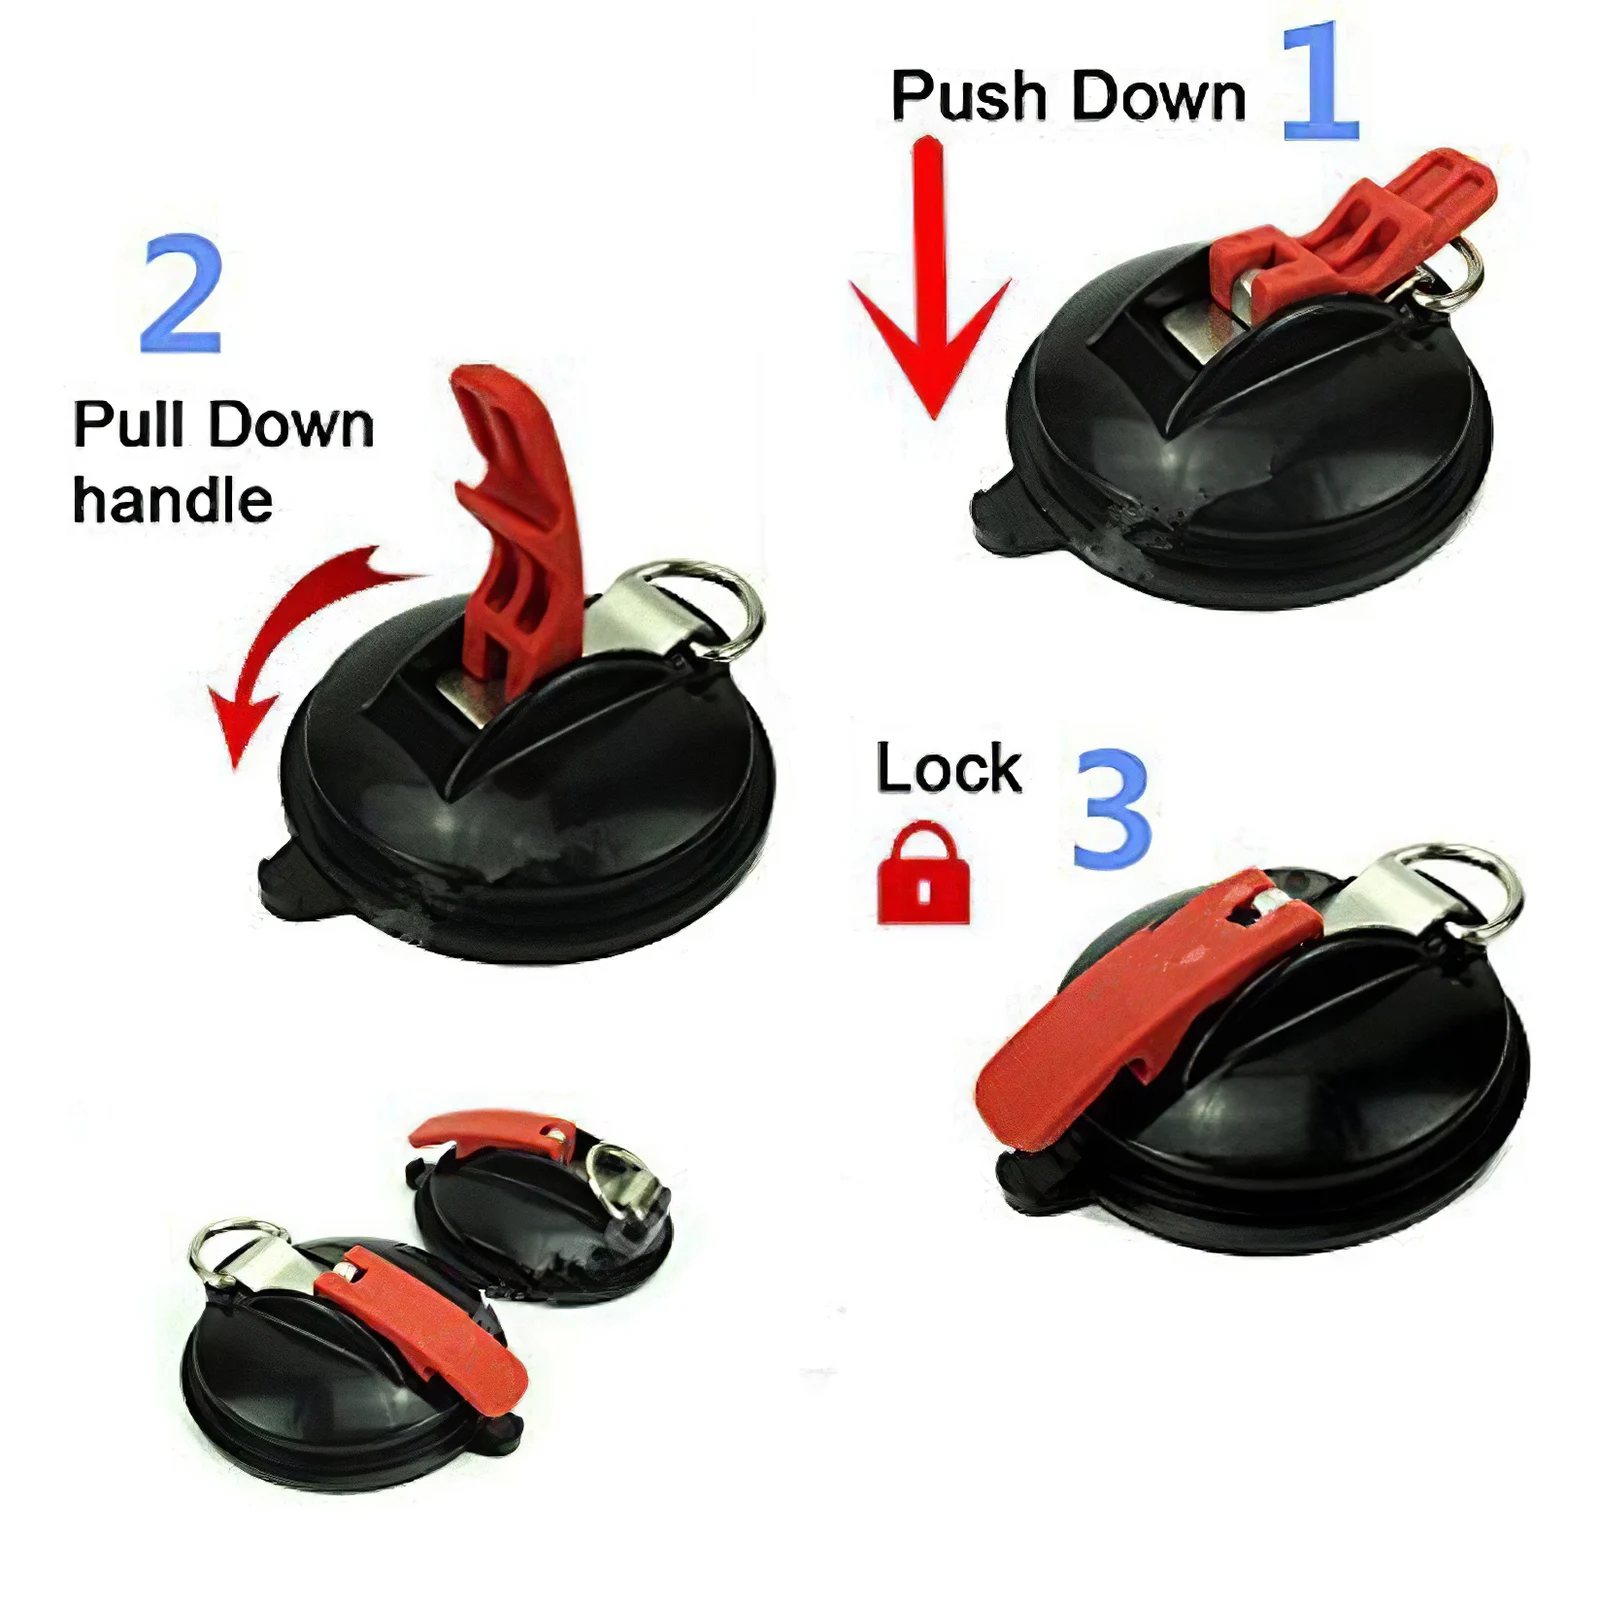 Car Awning Suction Cup Anchor with Securing S Hook Tie Down Heavy Duty Sucker Cup Outdoor Camping Tarp Accessory Use